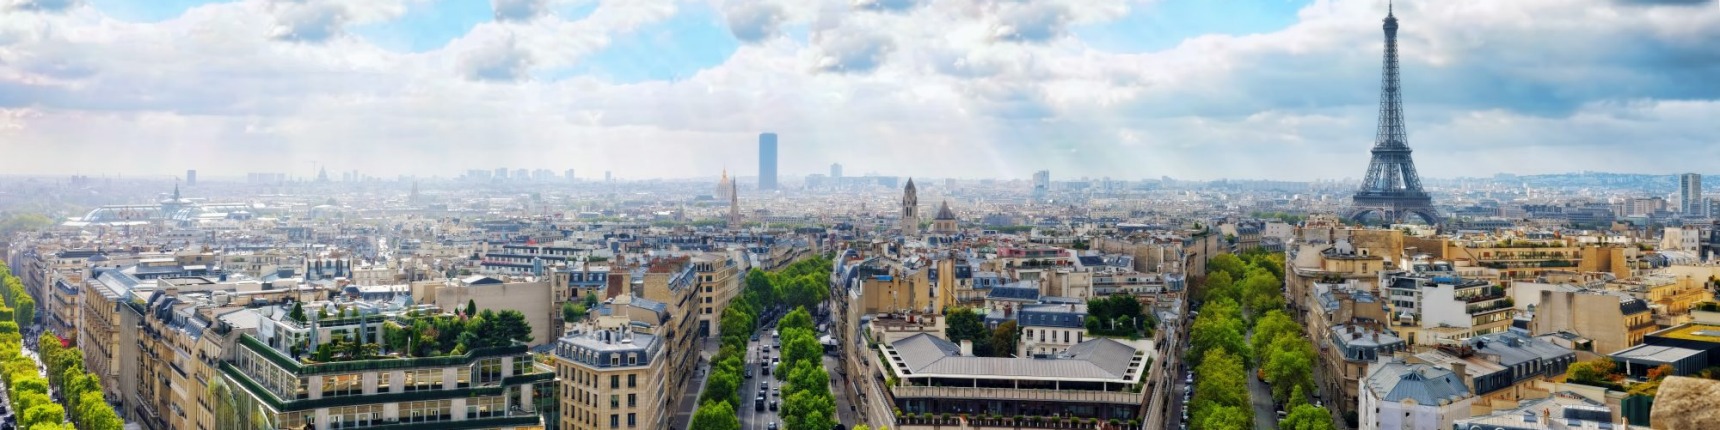 awesome view Paris Images